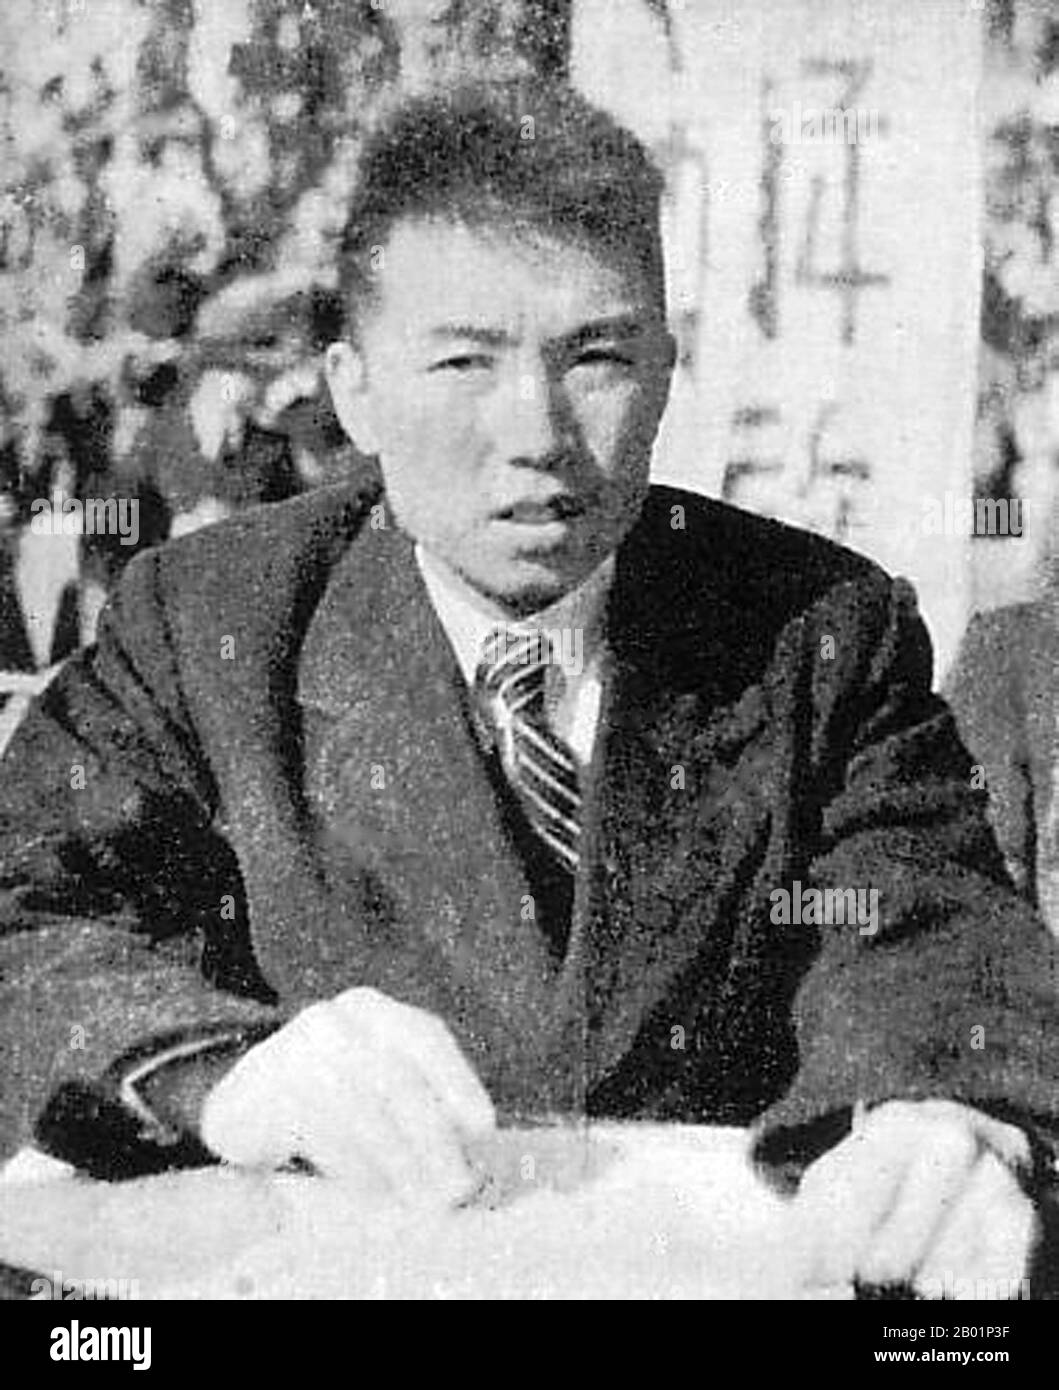 Korea: Kim Il Sung (15 April 1912 - 8 July 1994), the future supreme leader of North Korea (the Democratic People's Republic of Korea, DPRK), probably in the Russian Far East, 1946.  Kim Il-sung was a Korean communist politician who ruled North Korea, officially the Democratic People's Republic of Korea, from its establishment in 1948 until his death in 1994. He held the posts of Prime Minister from 1948 to 1972 and President from 1972 to his death. He was also the leader of the Workers' Party of Korea from 1949 to 1994 (titled as chairman from 1949 to 1966 and as general secretary after 1966) Stock Photo